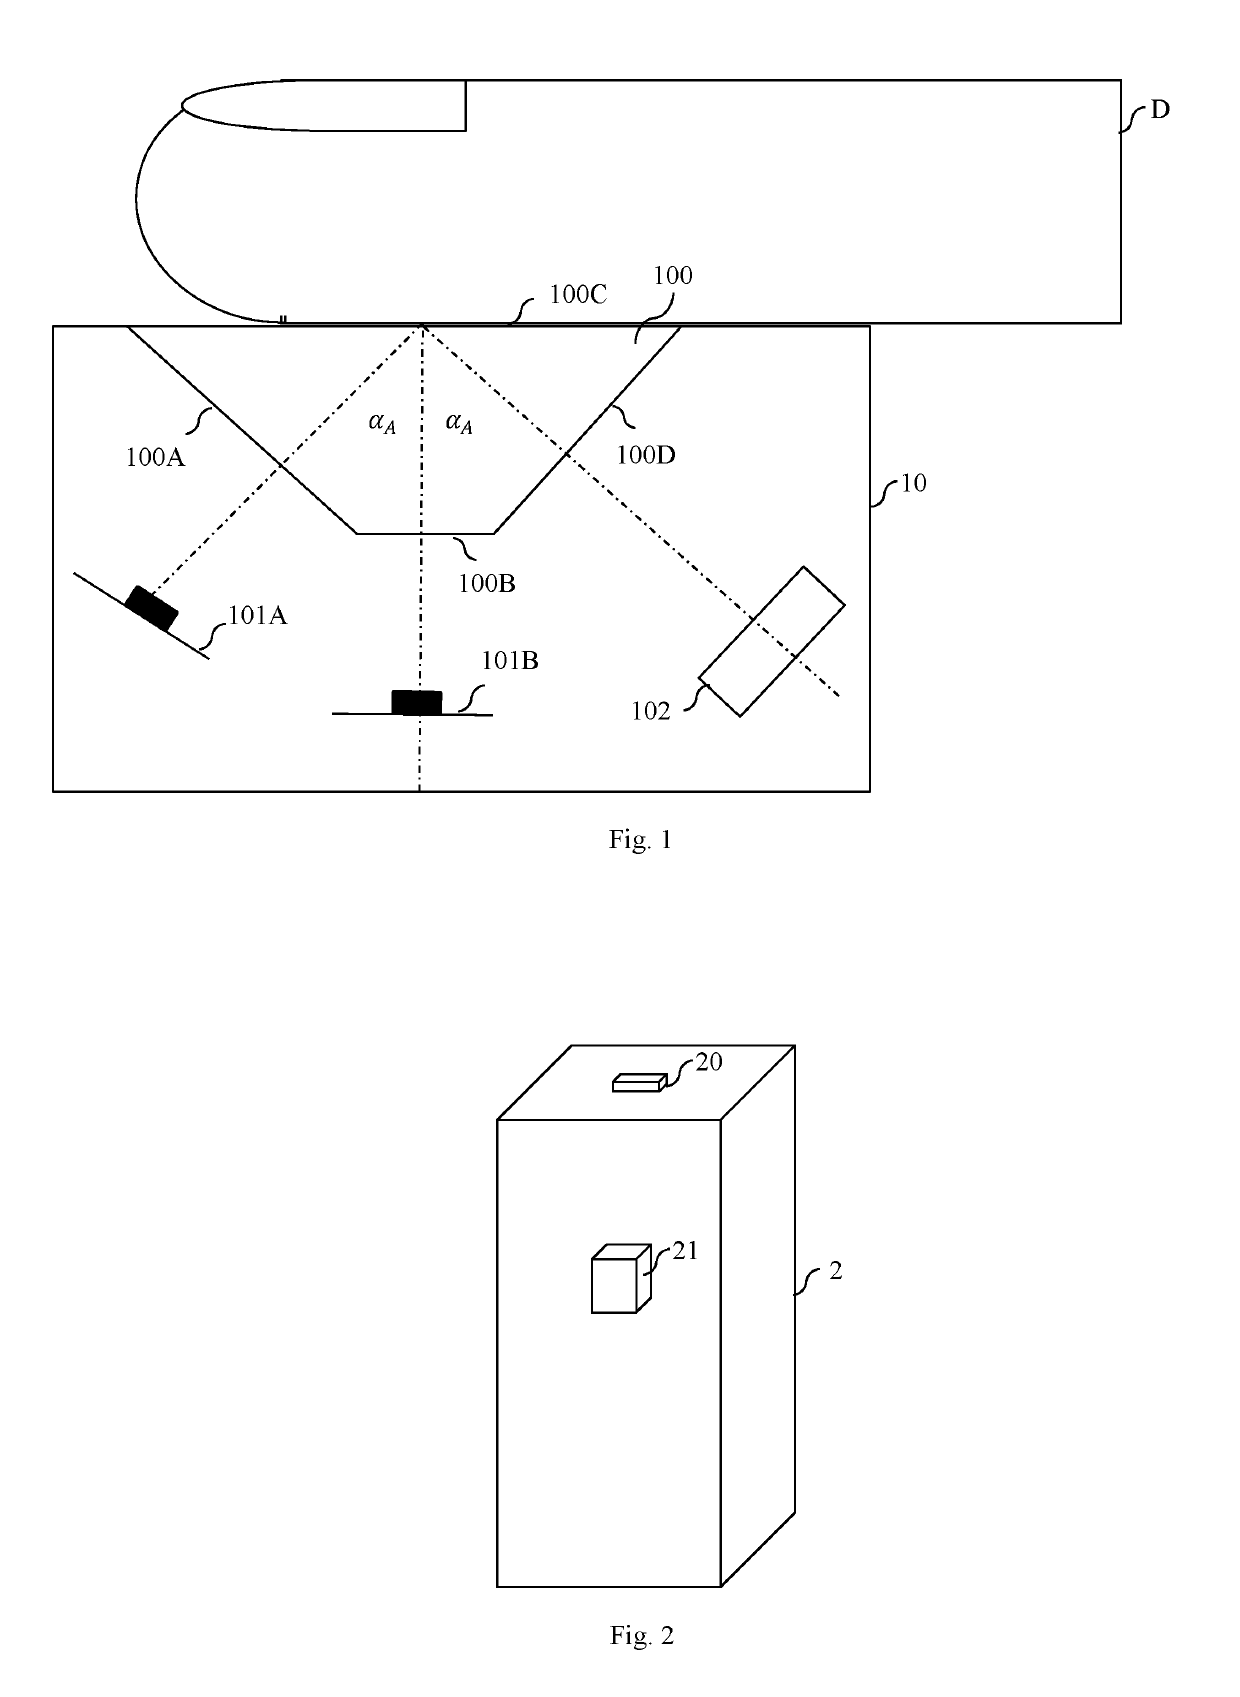 Method for detecting the presence of a body part carrying an imprint on a imprint sensor